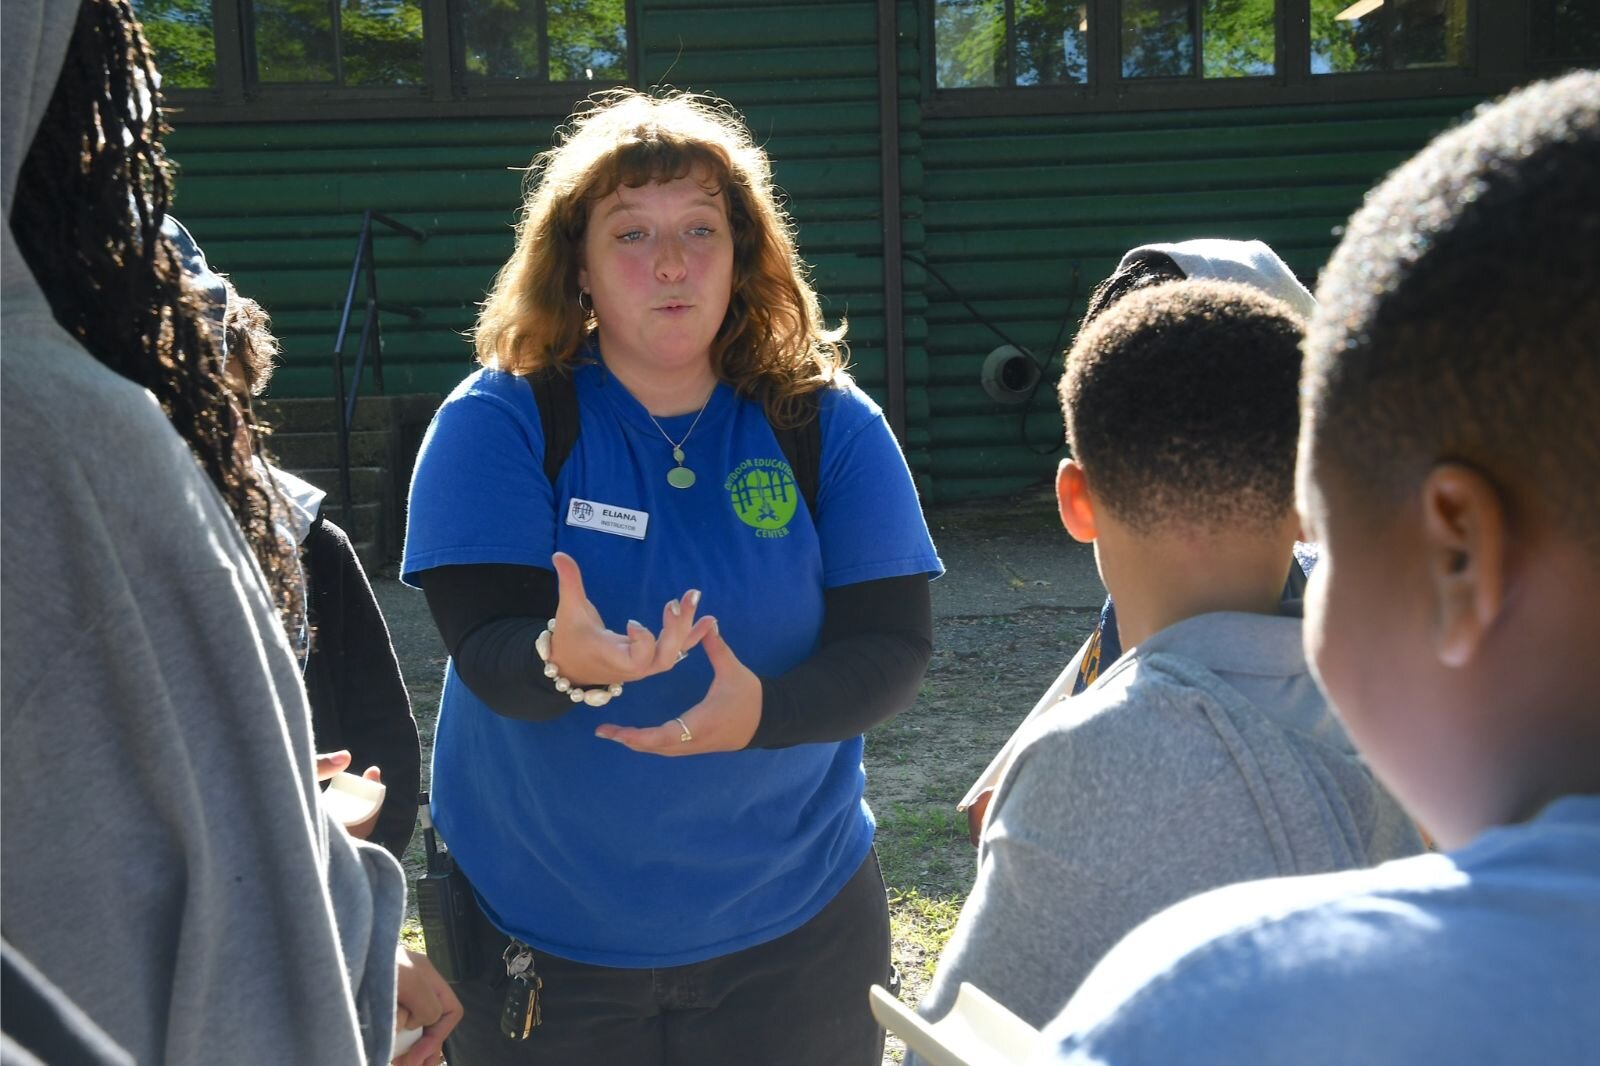 Instructor Eliana Brochu explains a team-building exercise to STEM students at the Battle Creek Outdoor Education Center.